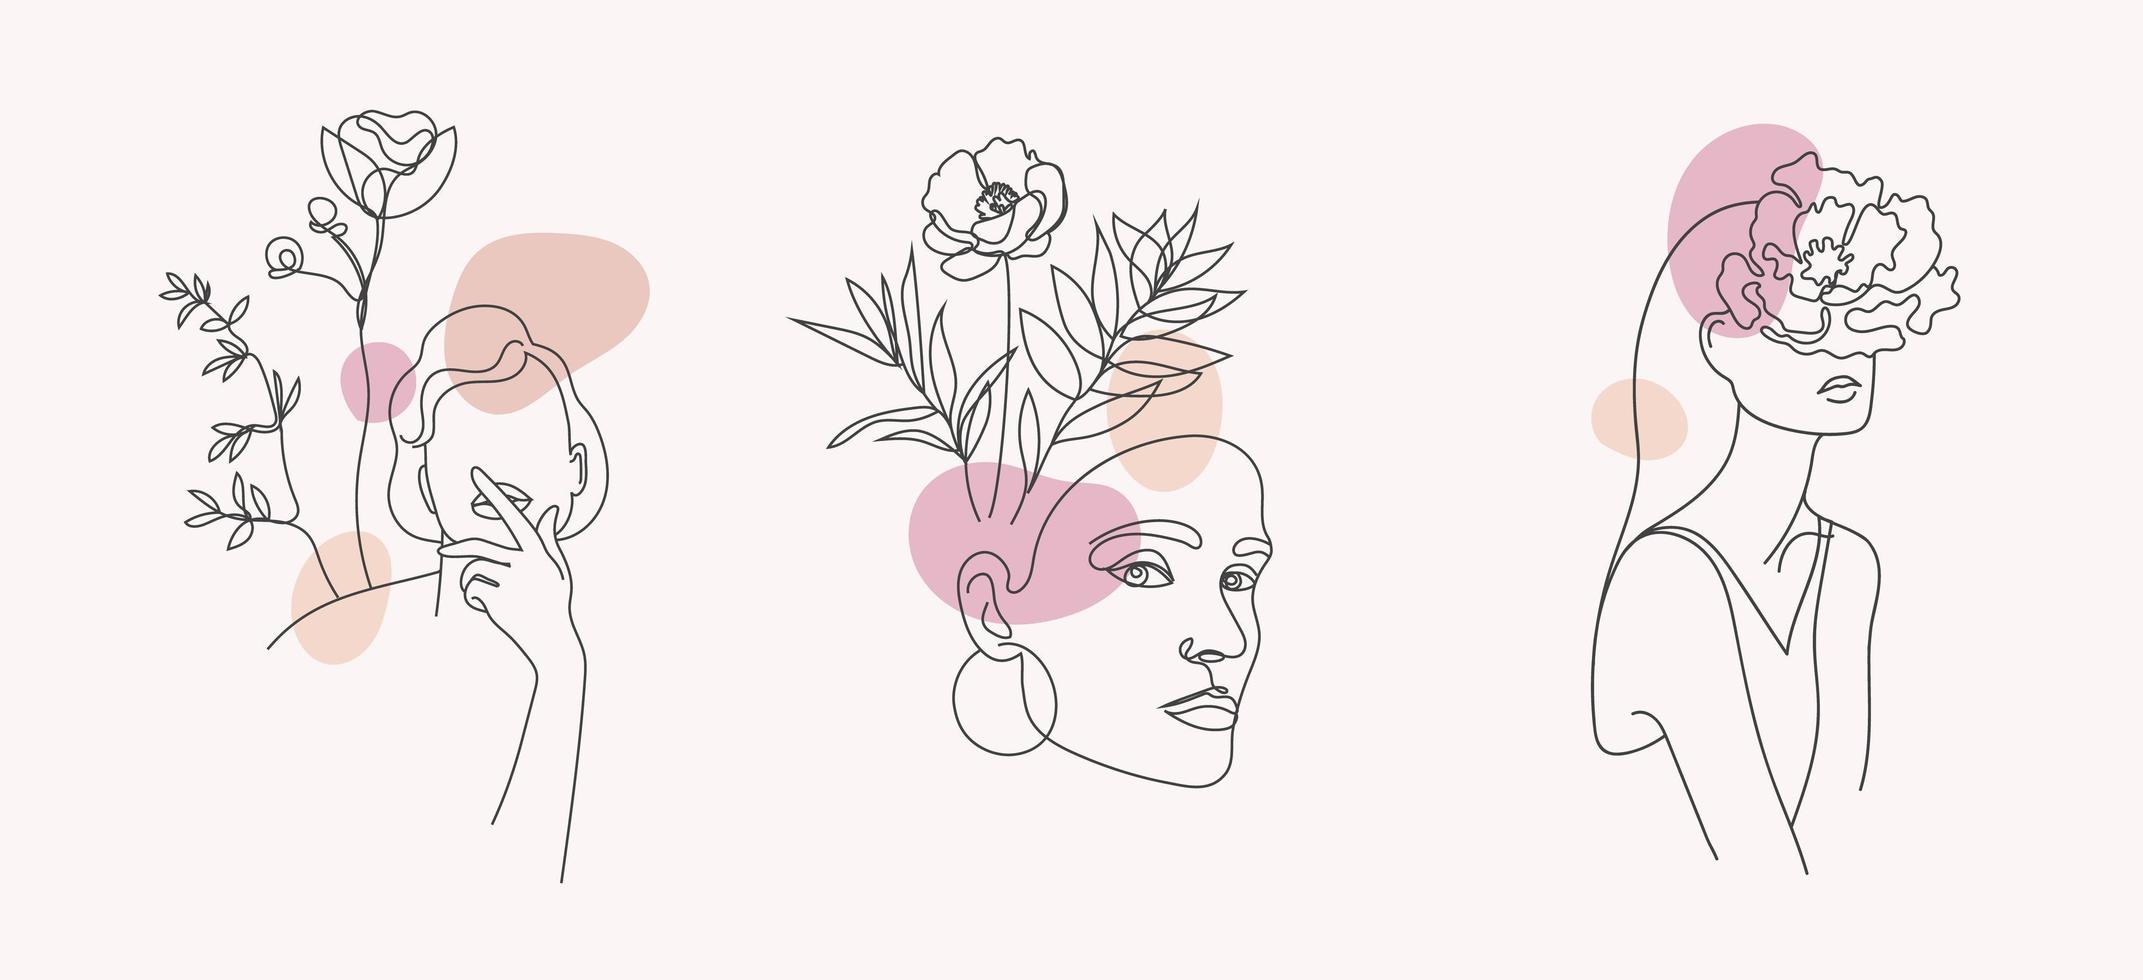 Vector set of women faces, bodies line art illustrations, logos with flowers and leaves, feminine nature concept. Use for prints, tattoos, posters, textile, logotypes, cards etc. Beautiful women